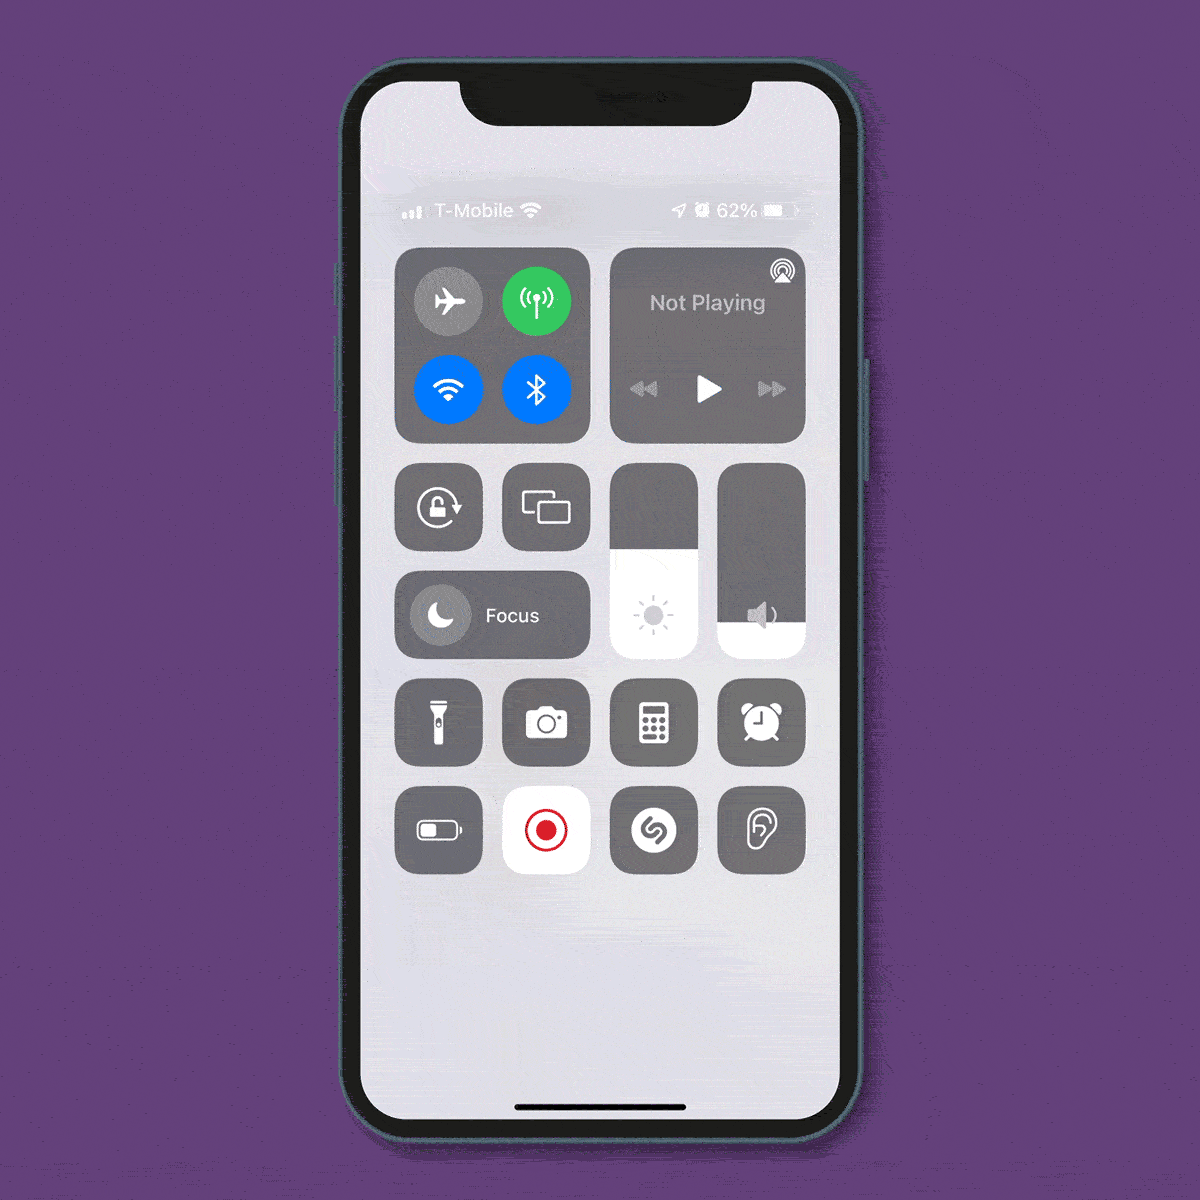 2 How To Turn On Do Not Disturb In Control Center